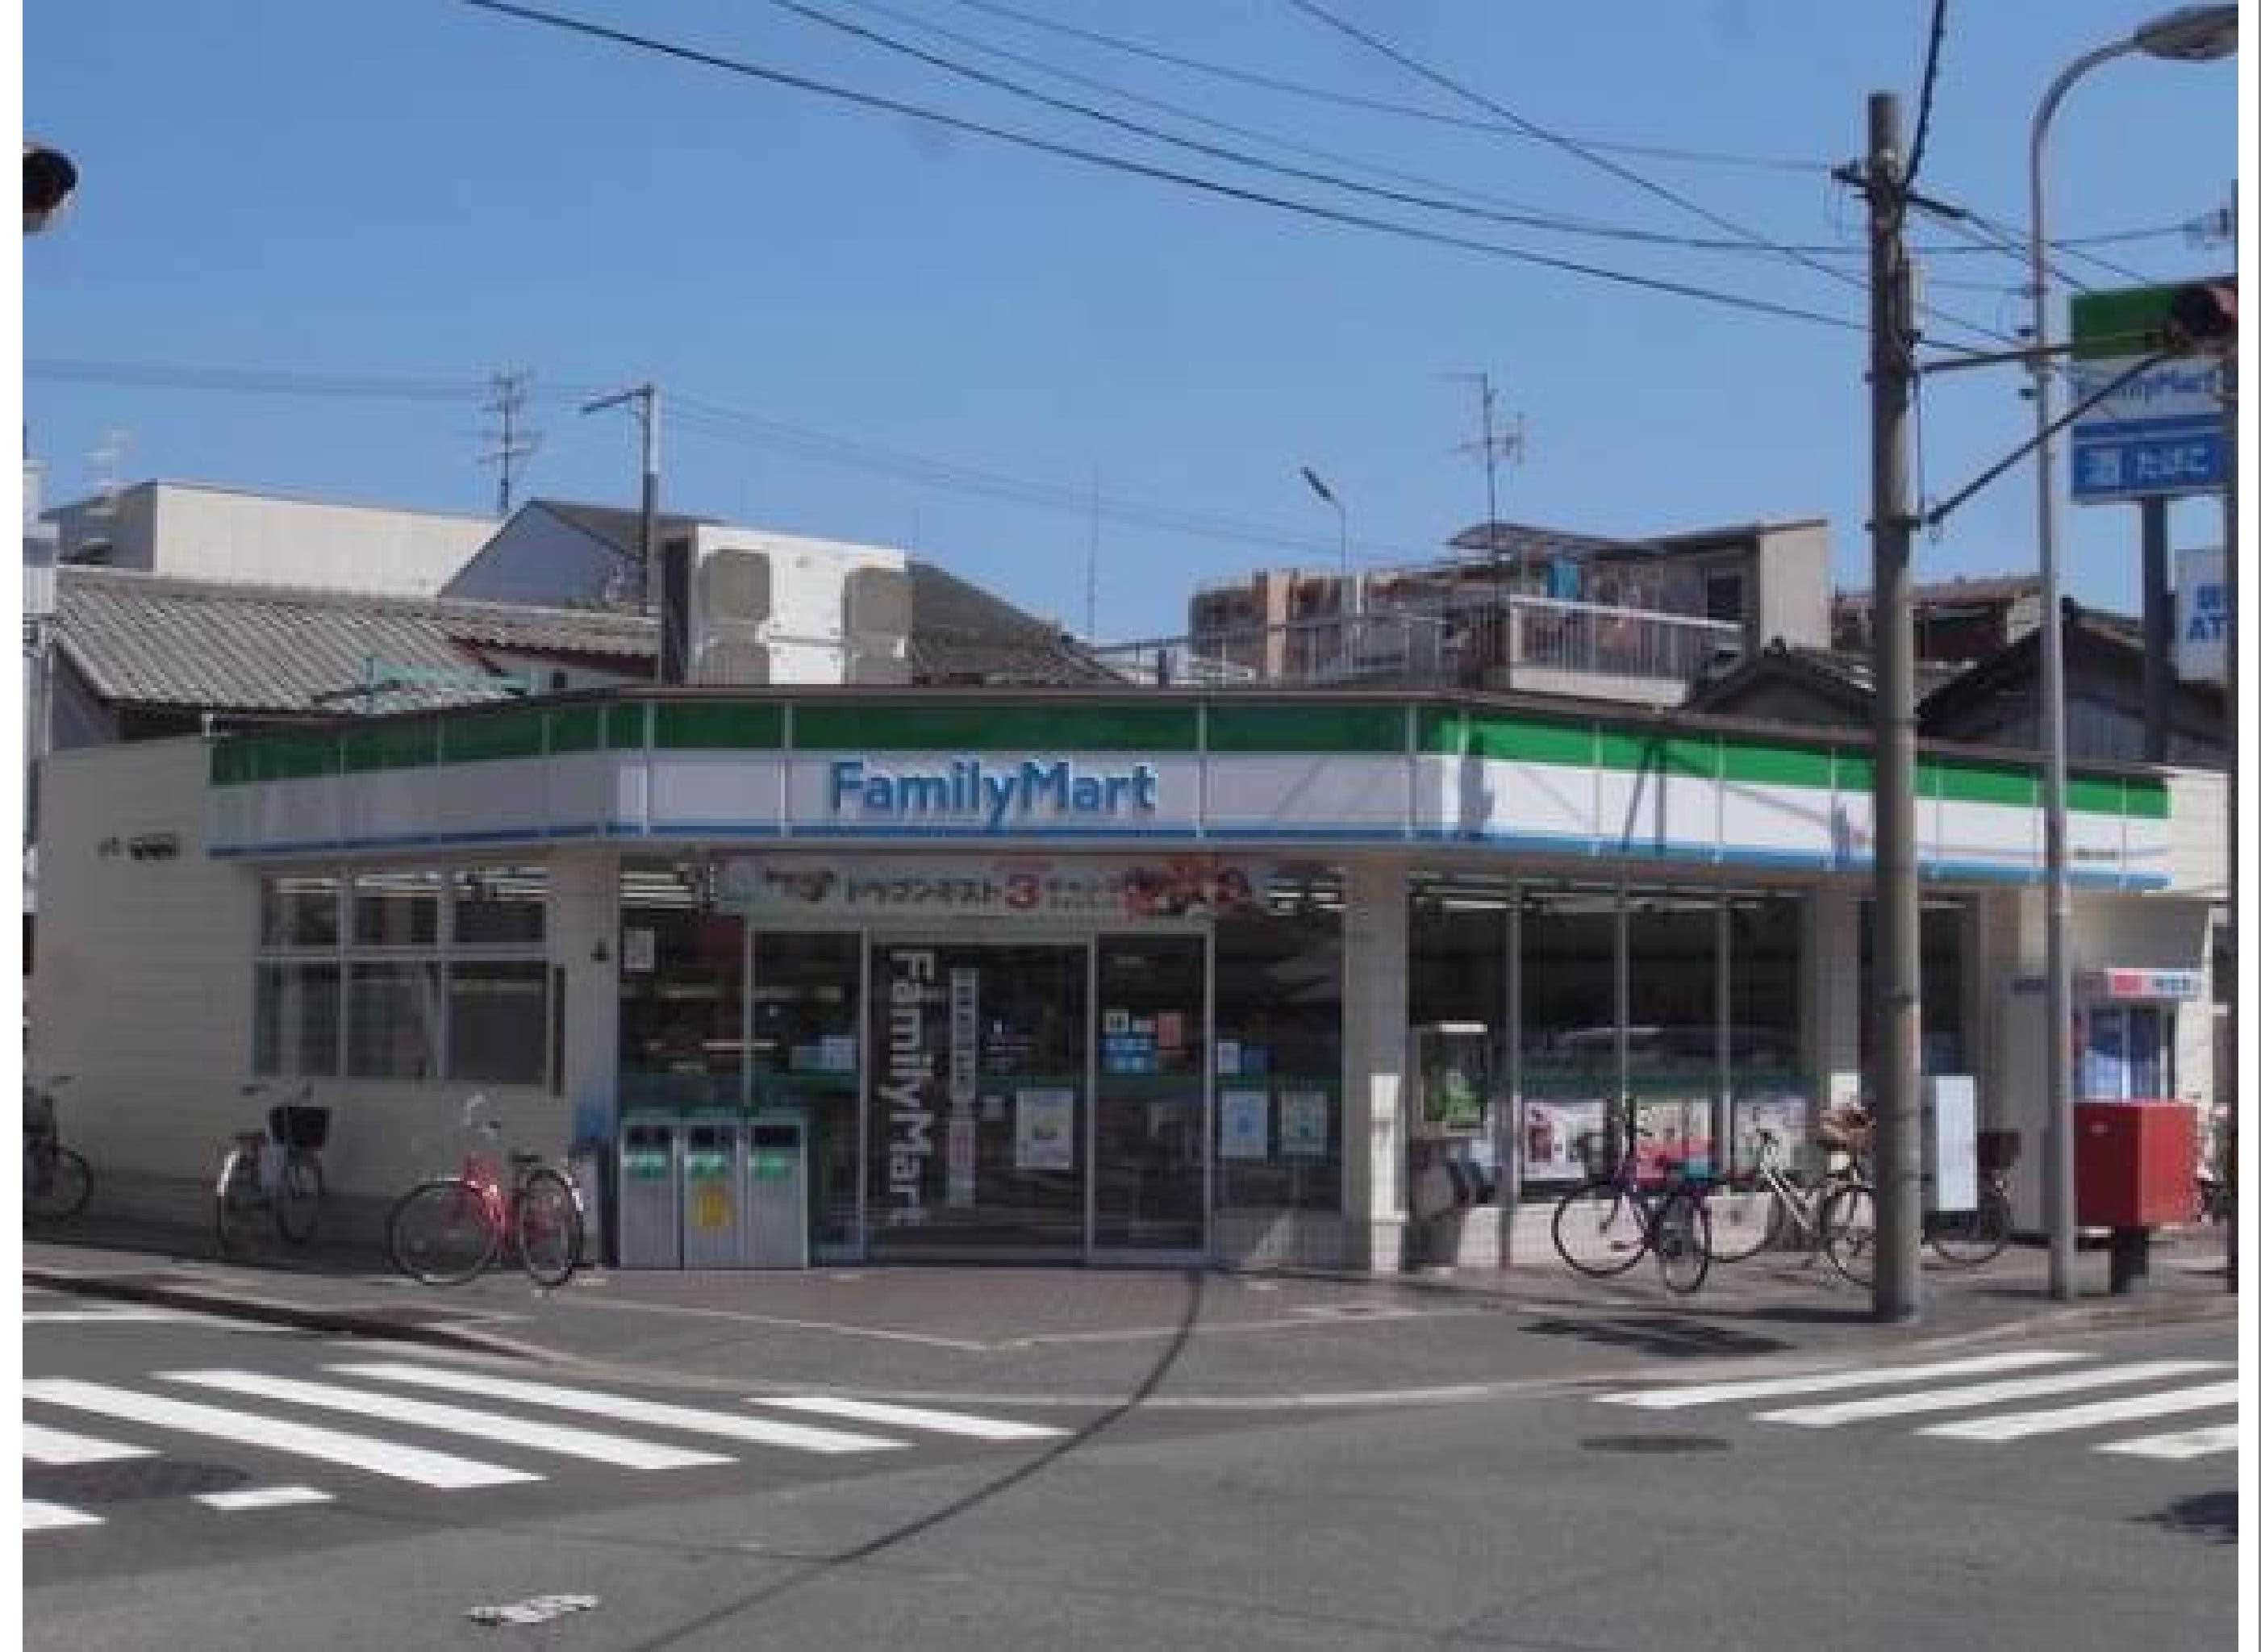 Convenience store. 223m to Family Mart (convenience store)